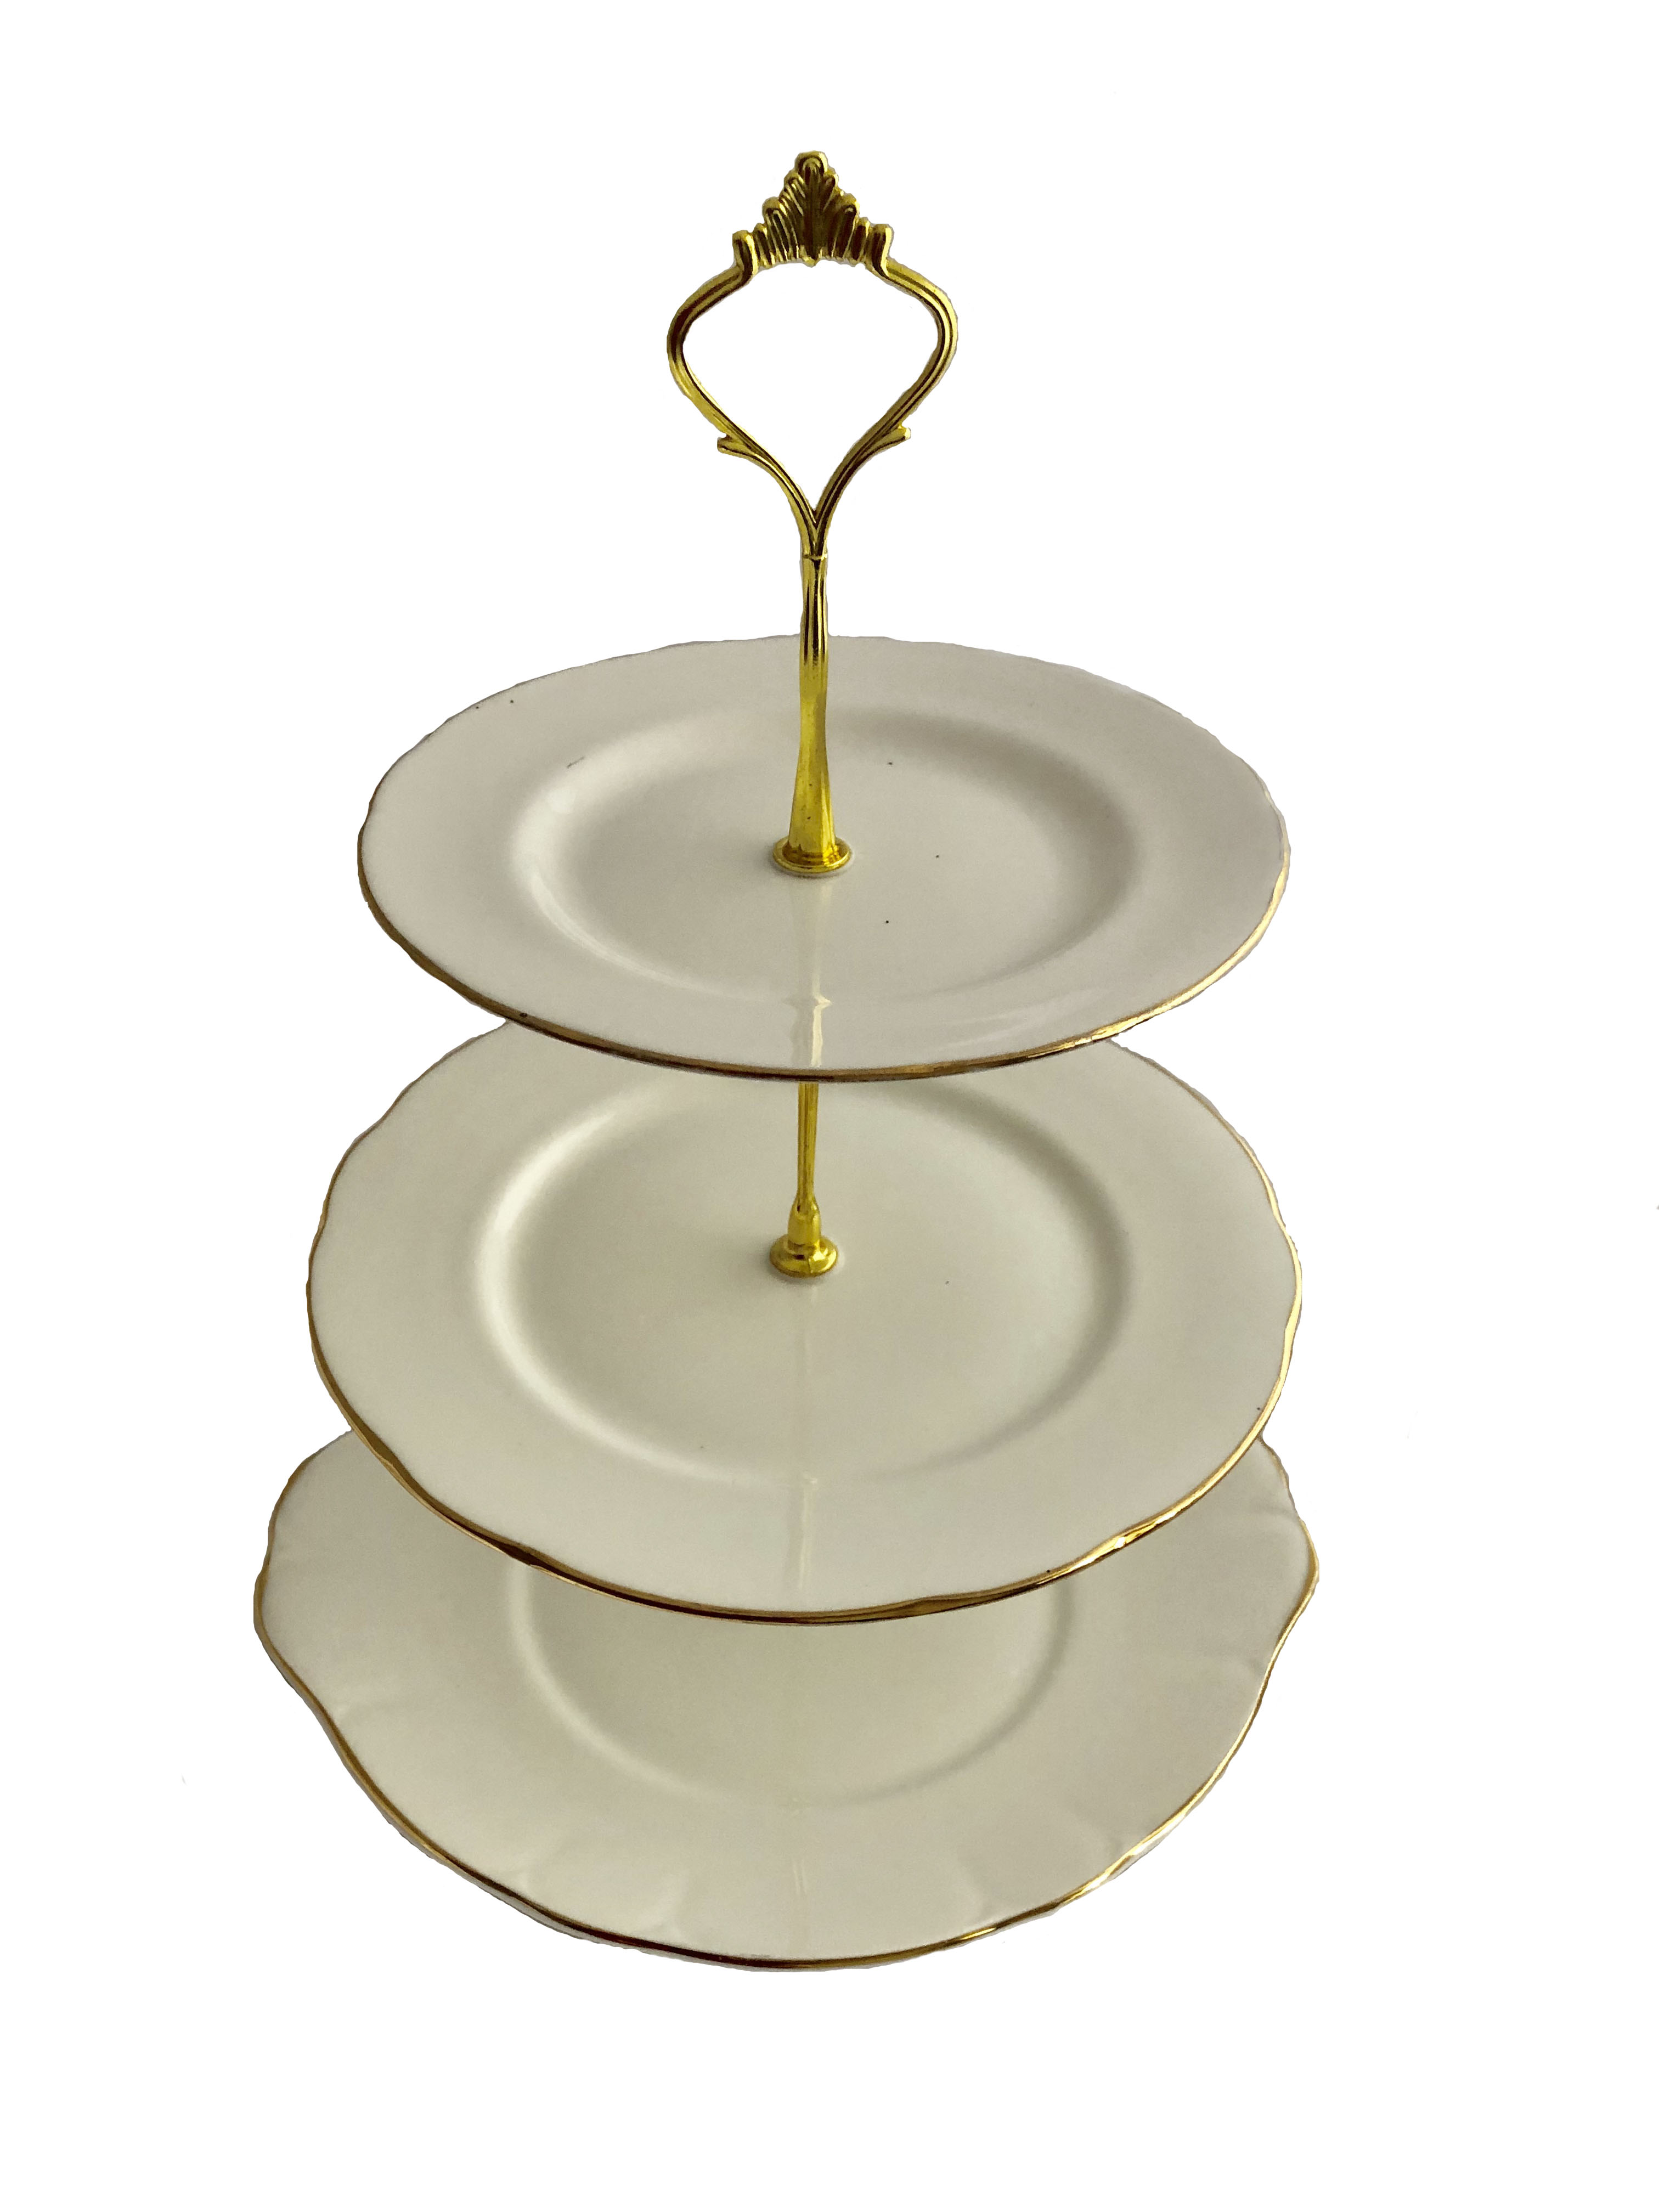 category_D1340 - Cake Stand 3 Tier - Gold Rim